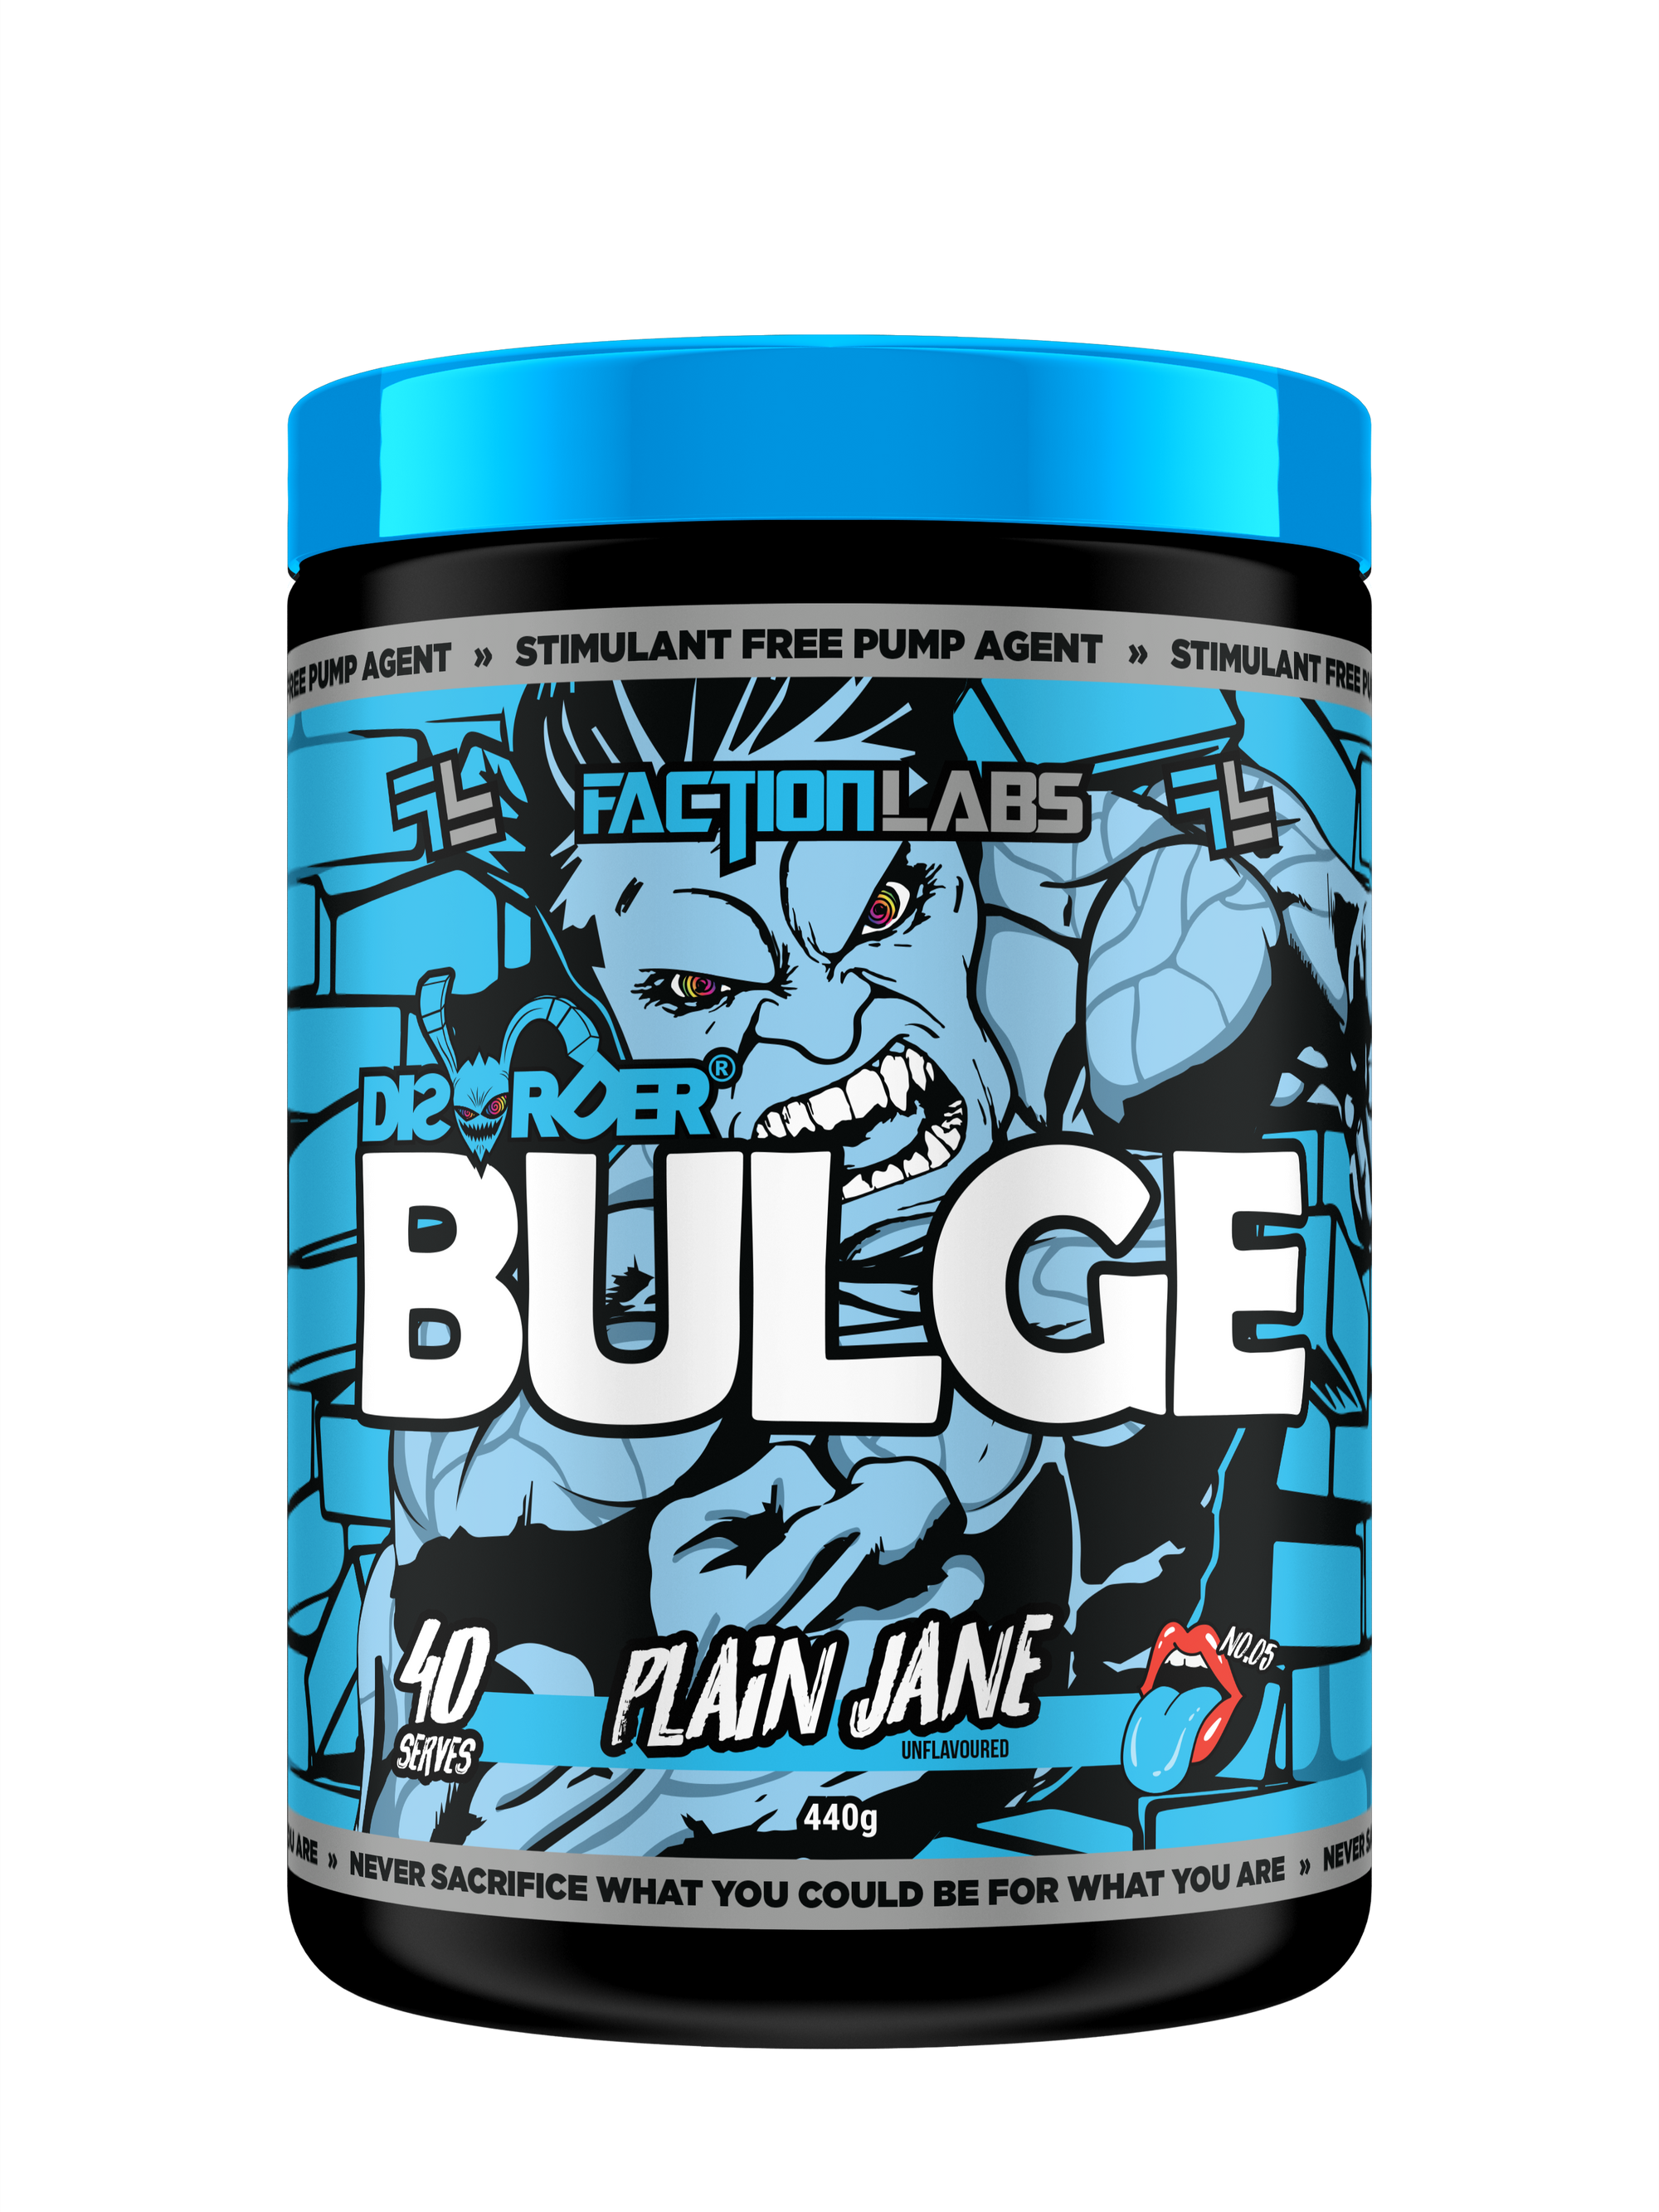 Fitness Hero Presents, Faction Labs Disorder Bulge. A stimulant-free pump pre workout. Support strength and endurance for bigger lifts.